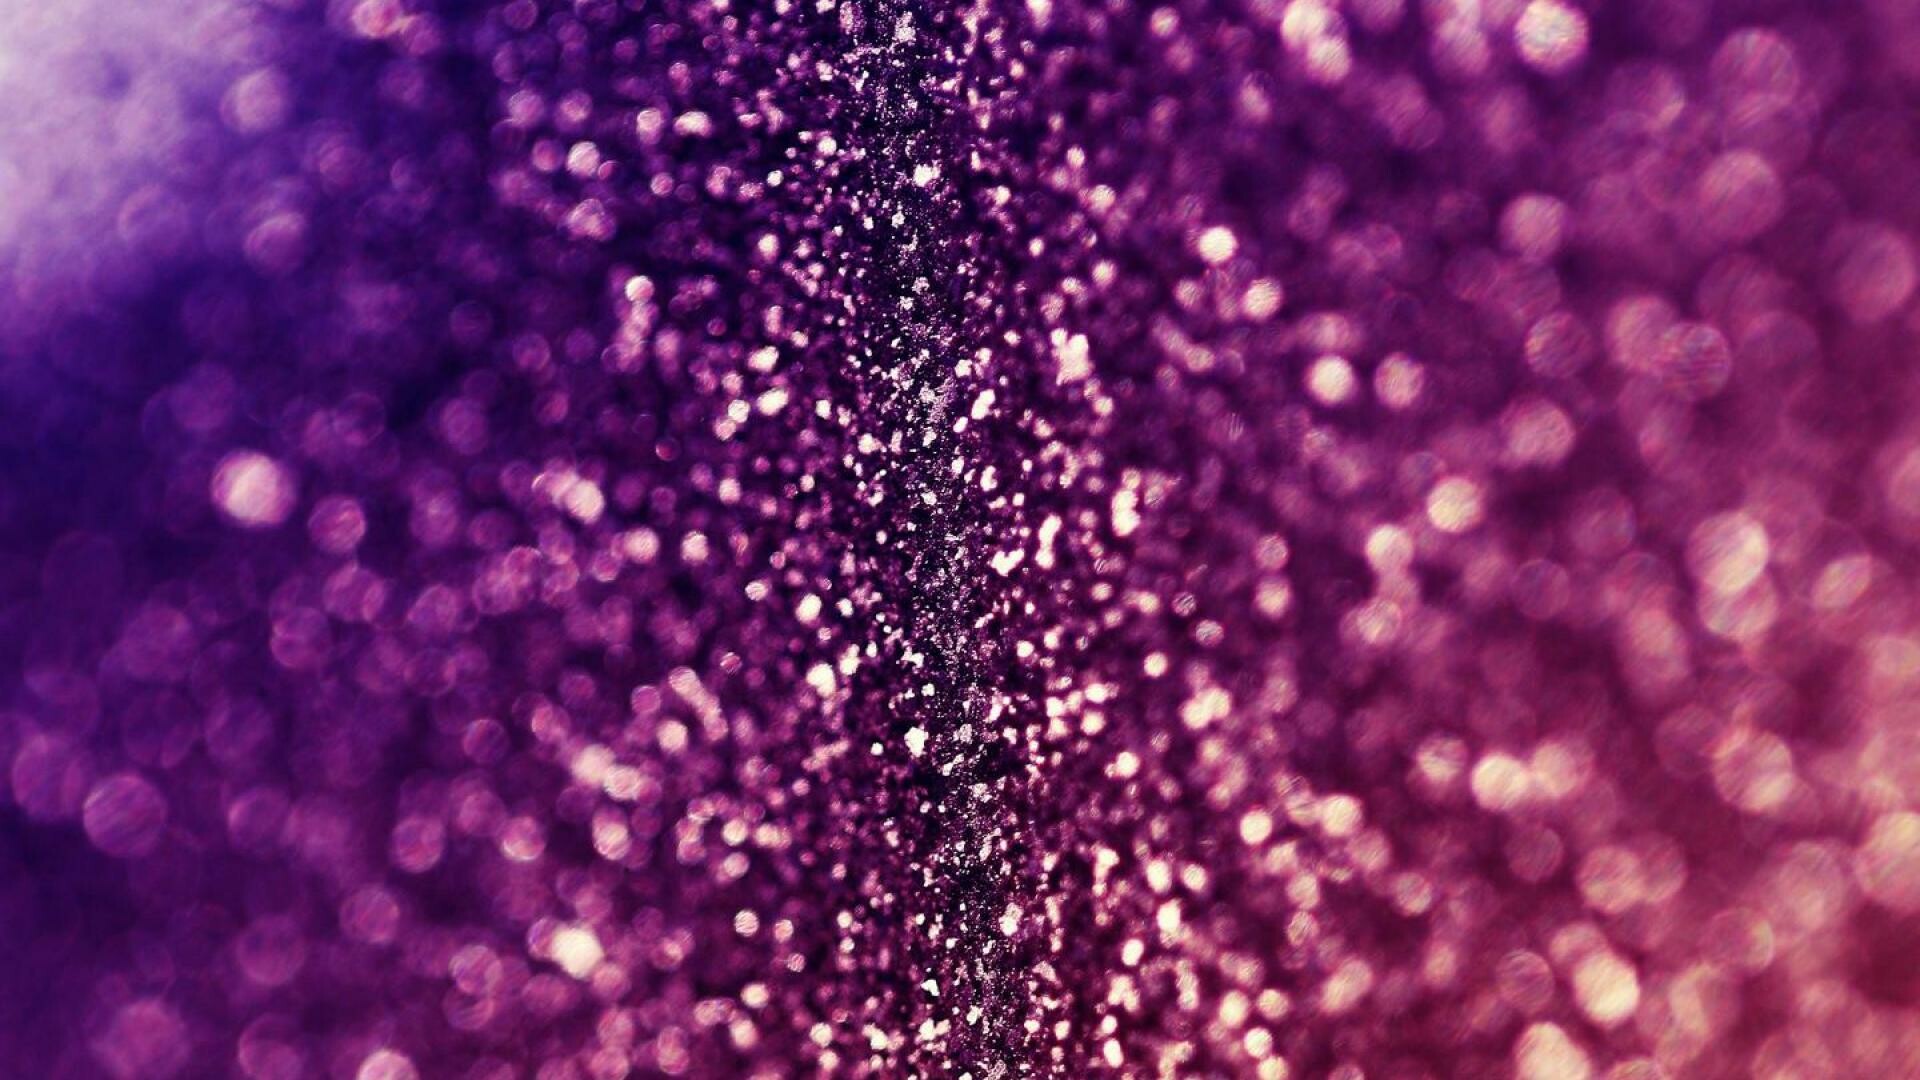 Sparkle: Pink glitter, A popular choice for body glitz and make up. 1920x1080 Full HD Wallpaper.